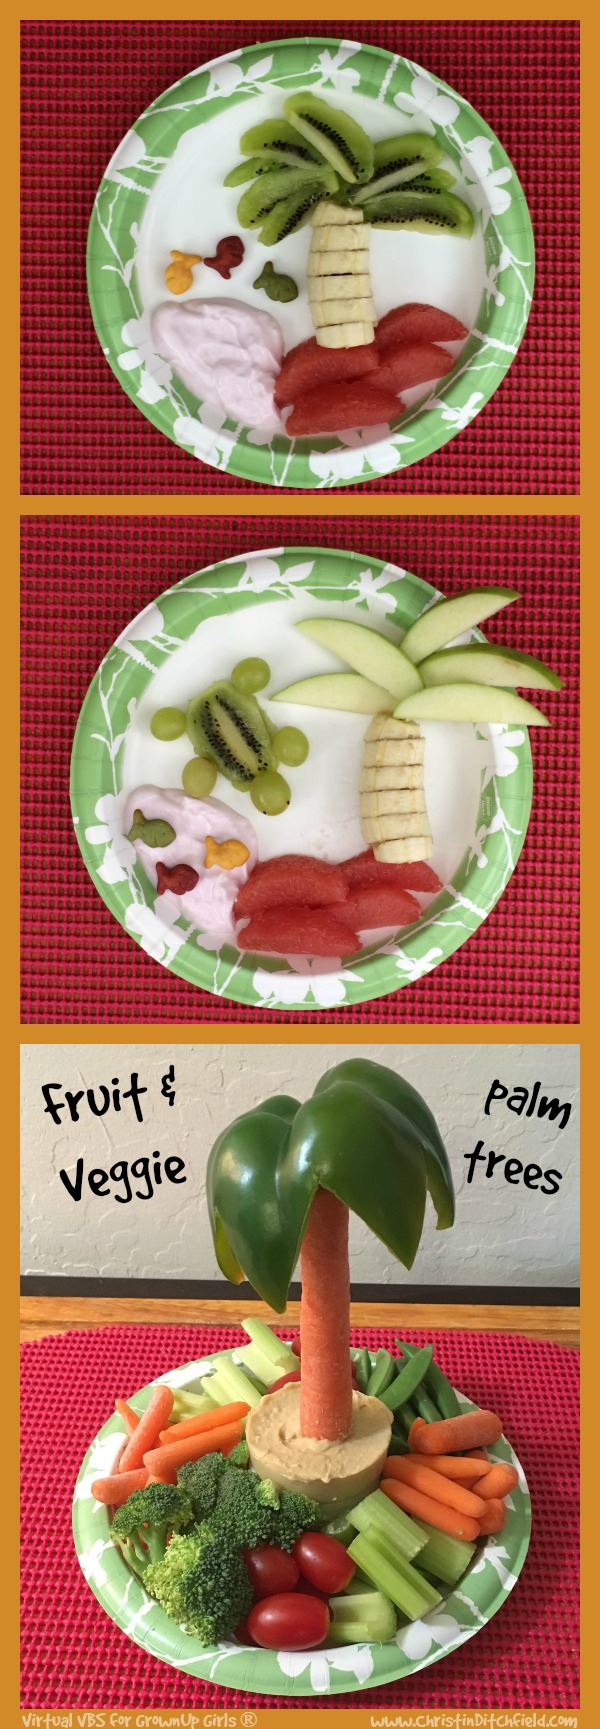 VBS Fruit and Veggie Palm Trees